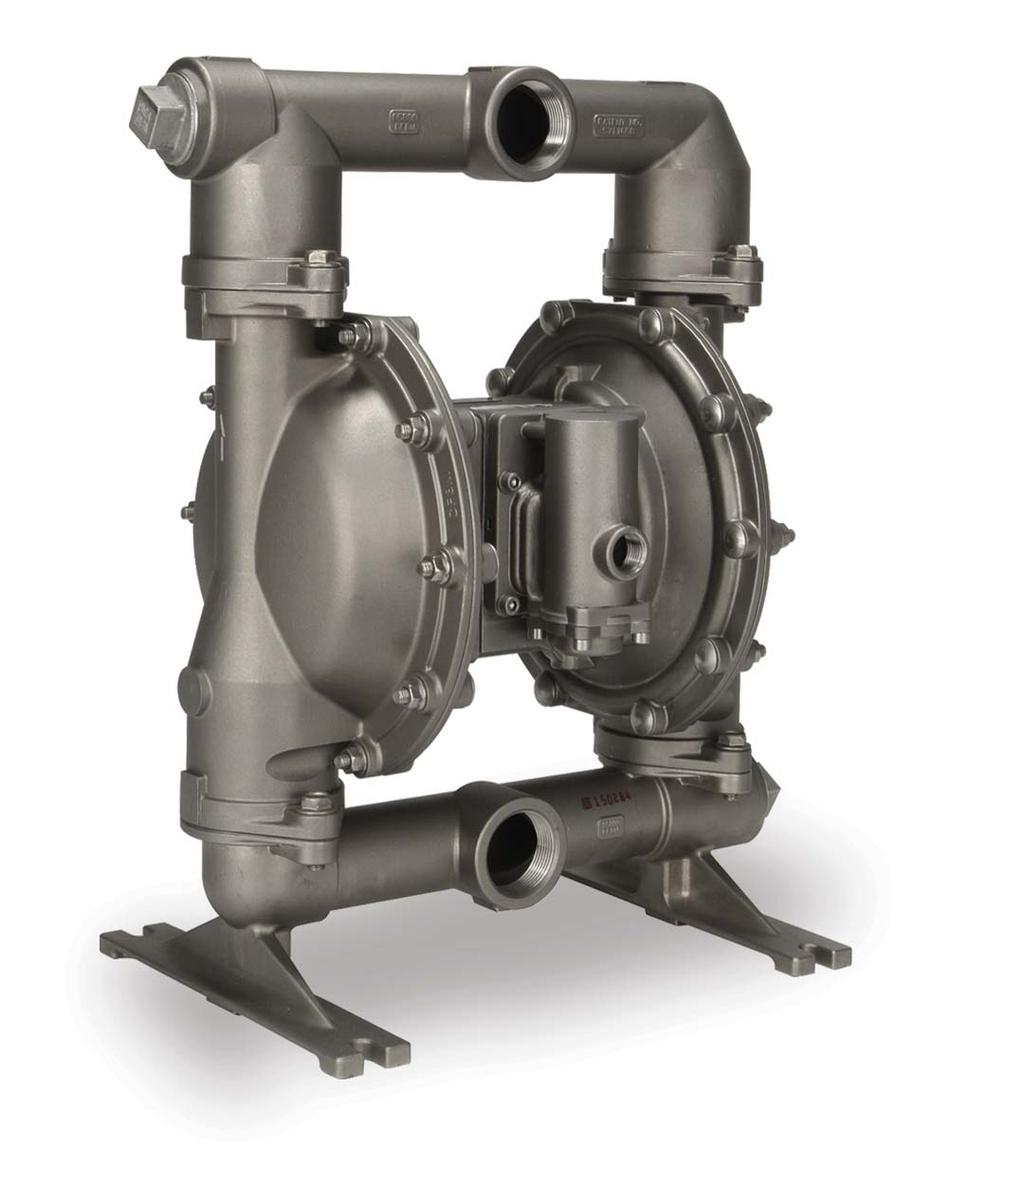 The Ultimate Process Pump EXPert eries Pumps: Metallic Models From its simple beginnings as a utility / dewatering / trash pump, through its various phases of design evolution, the diaphragm pump has